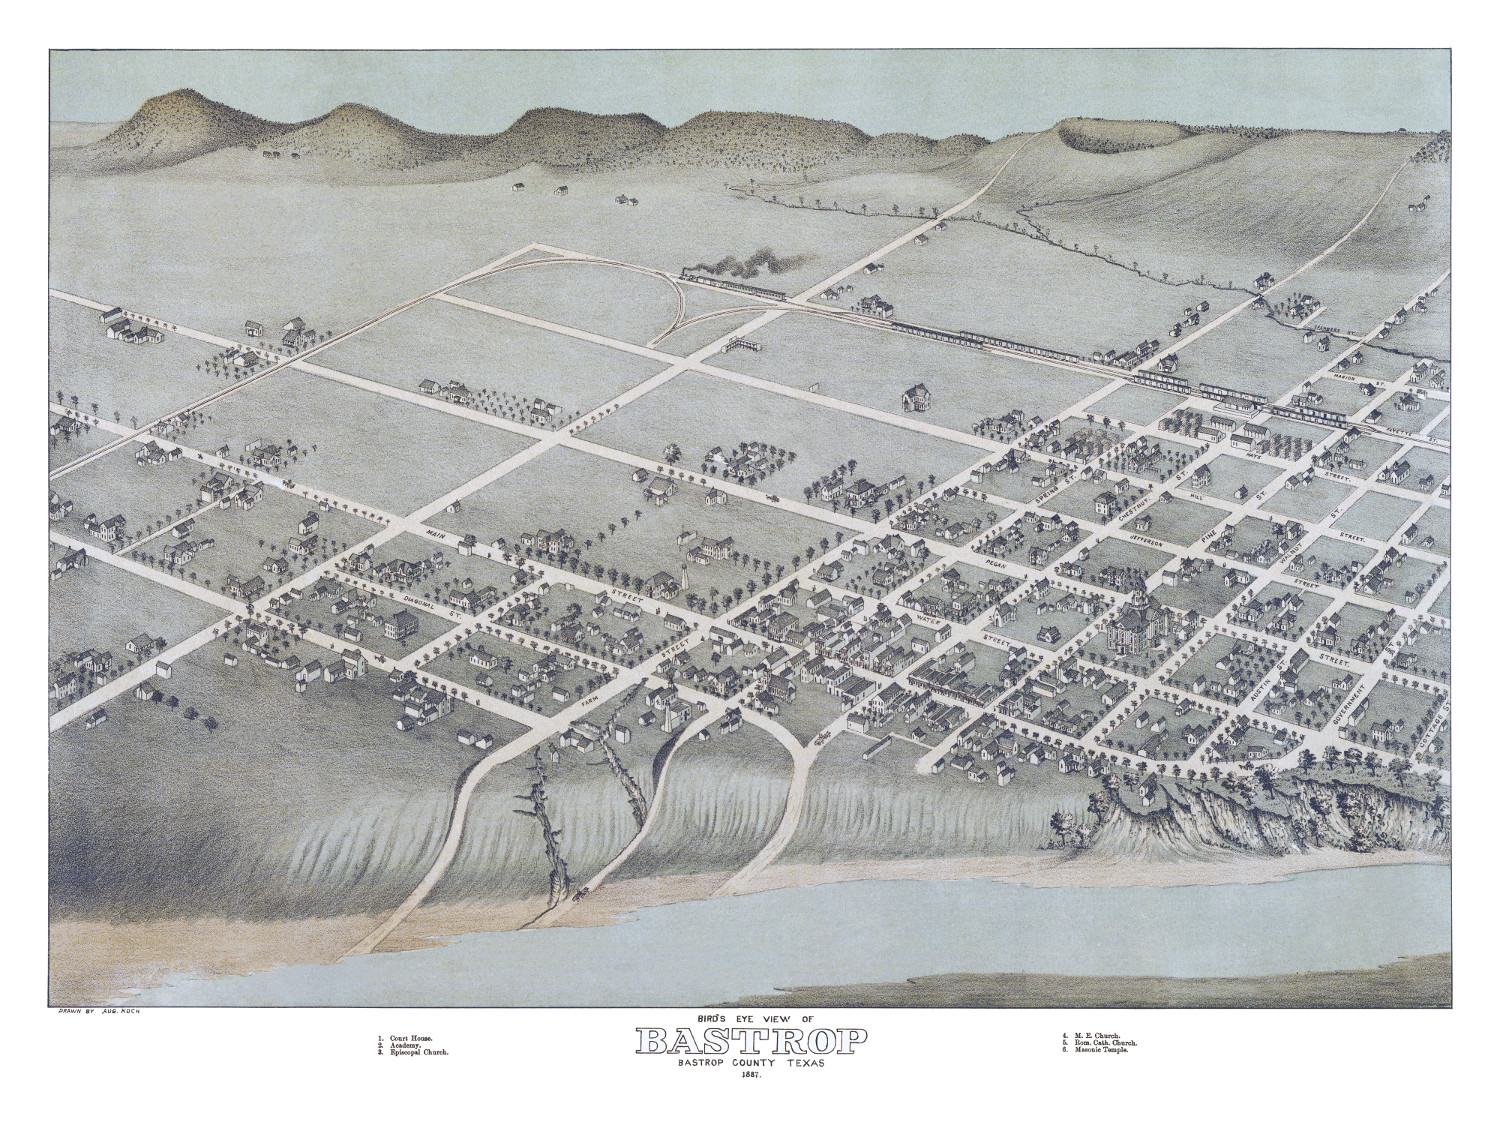 Beautifully detailed map of Bastrop, TX in 1887.